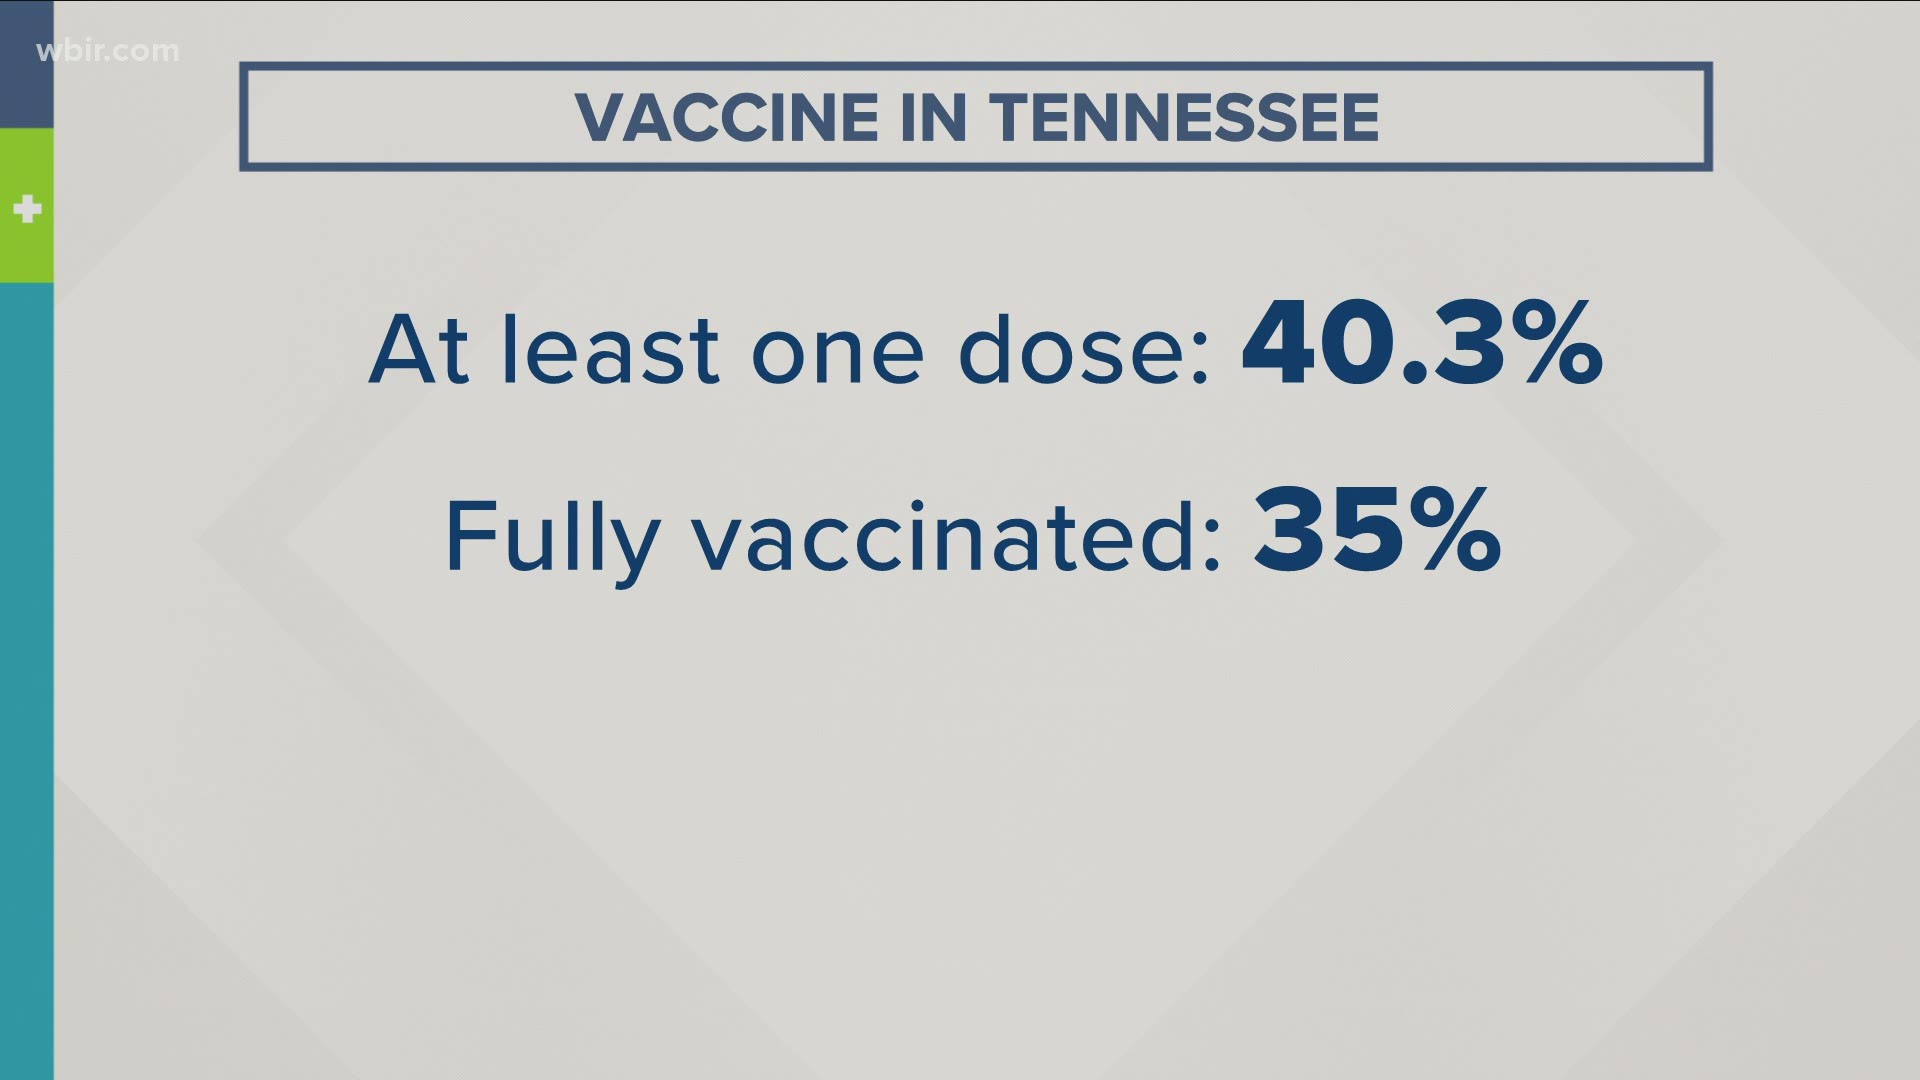 About 40 percent of people in Tennessee have received at least one  dose of the COVID-19 vaccine